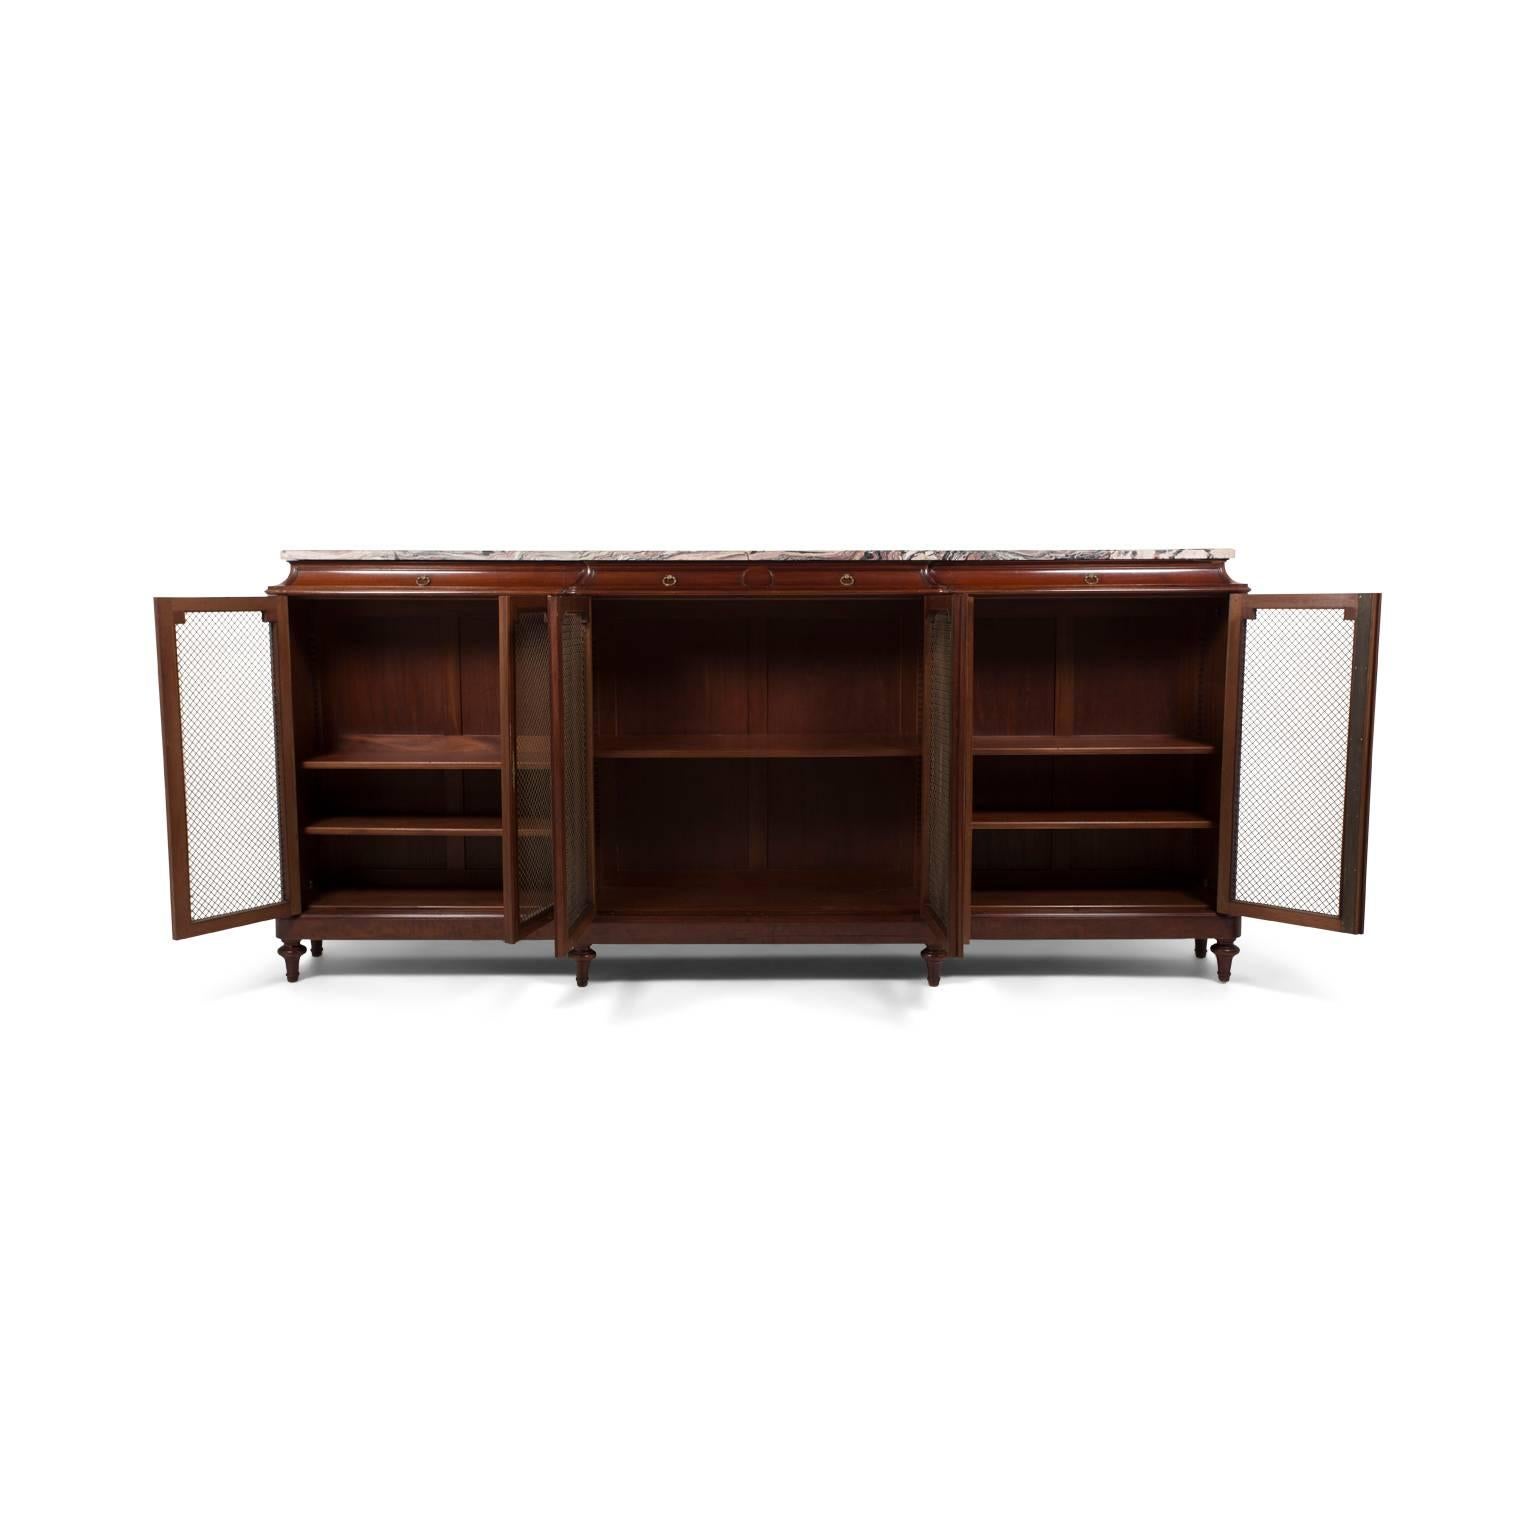 A most impressive mahogany bookcase almost 10 feet in width. Six doors with gilt mesh covers. A spectacular single, continuous piece of marble on top. This is truly an imposing piece that serve as the focal point in an office, living room, or dining